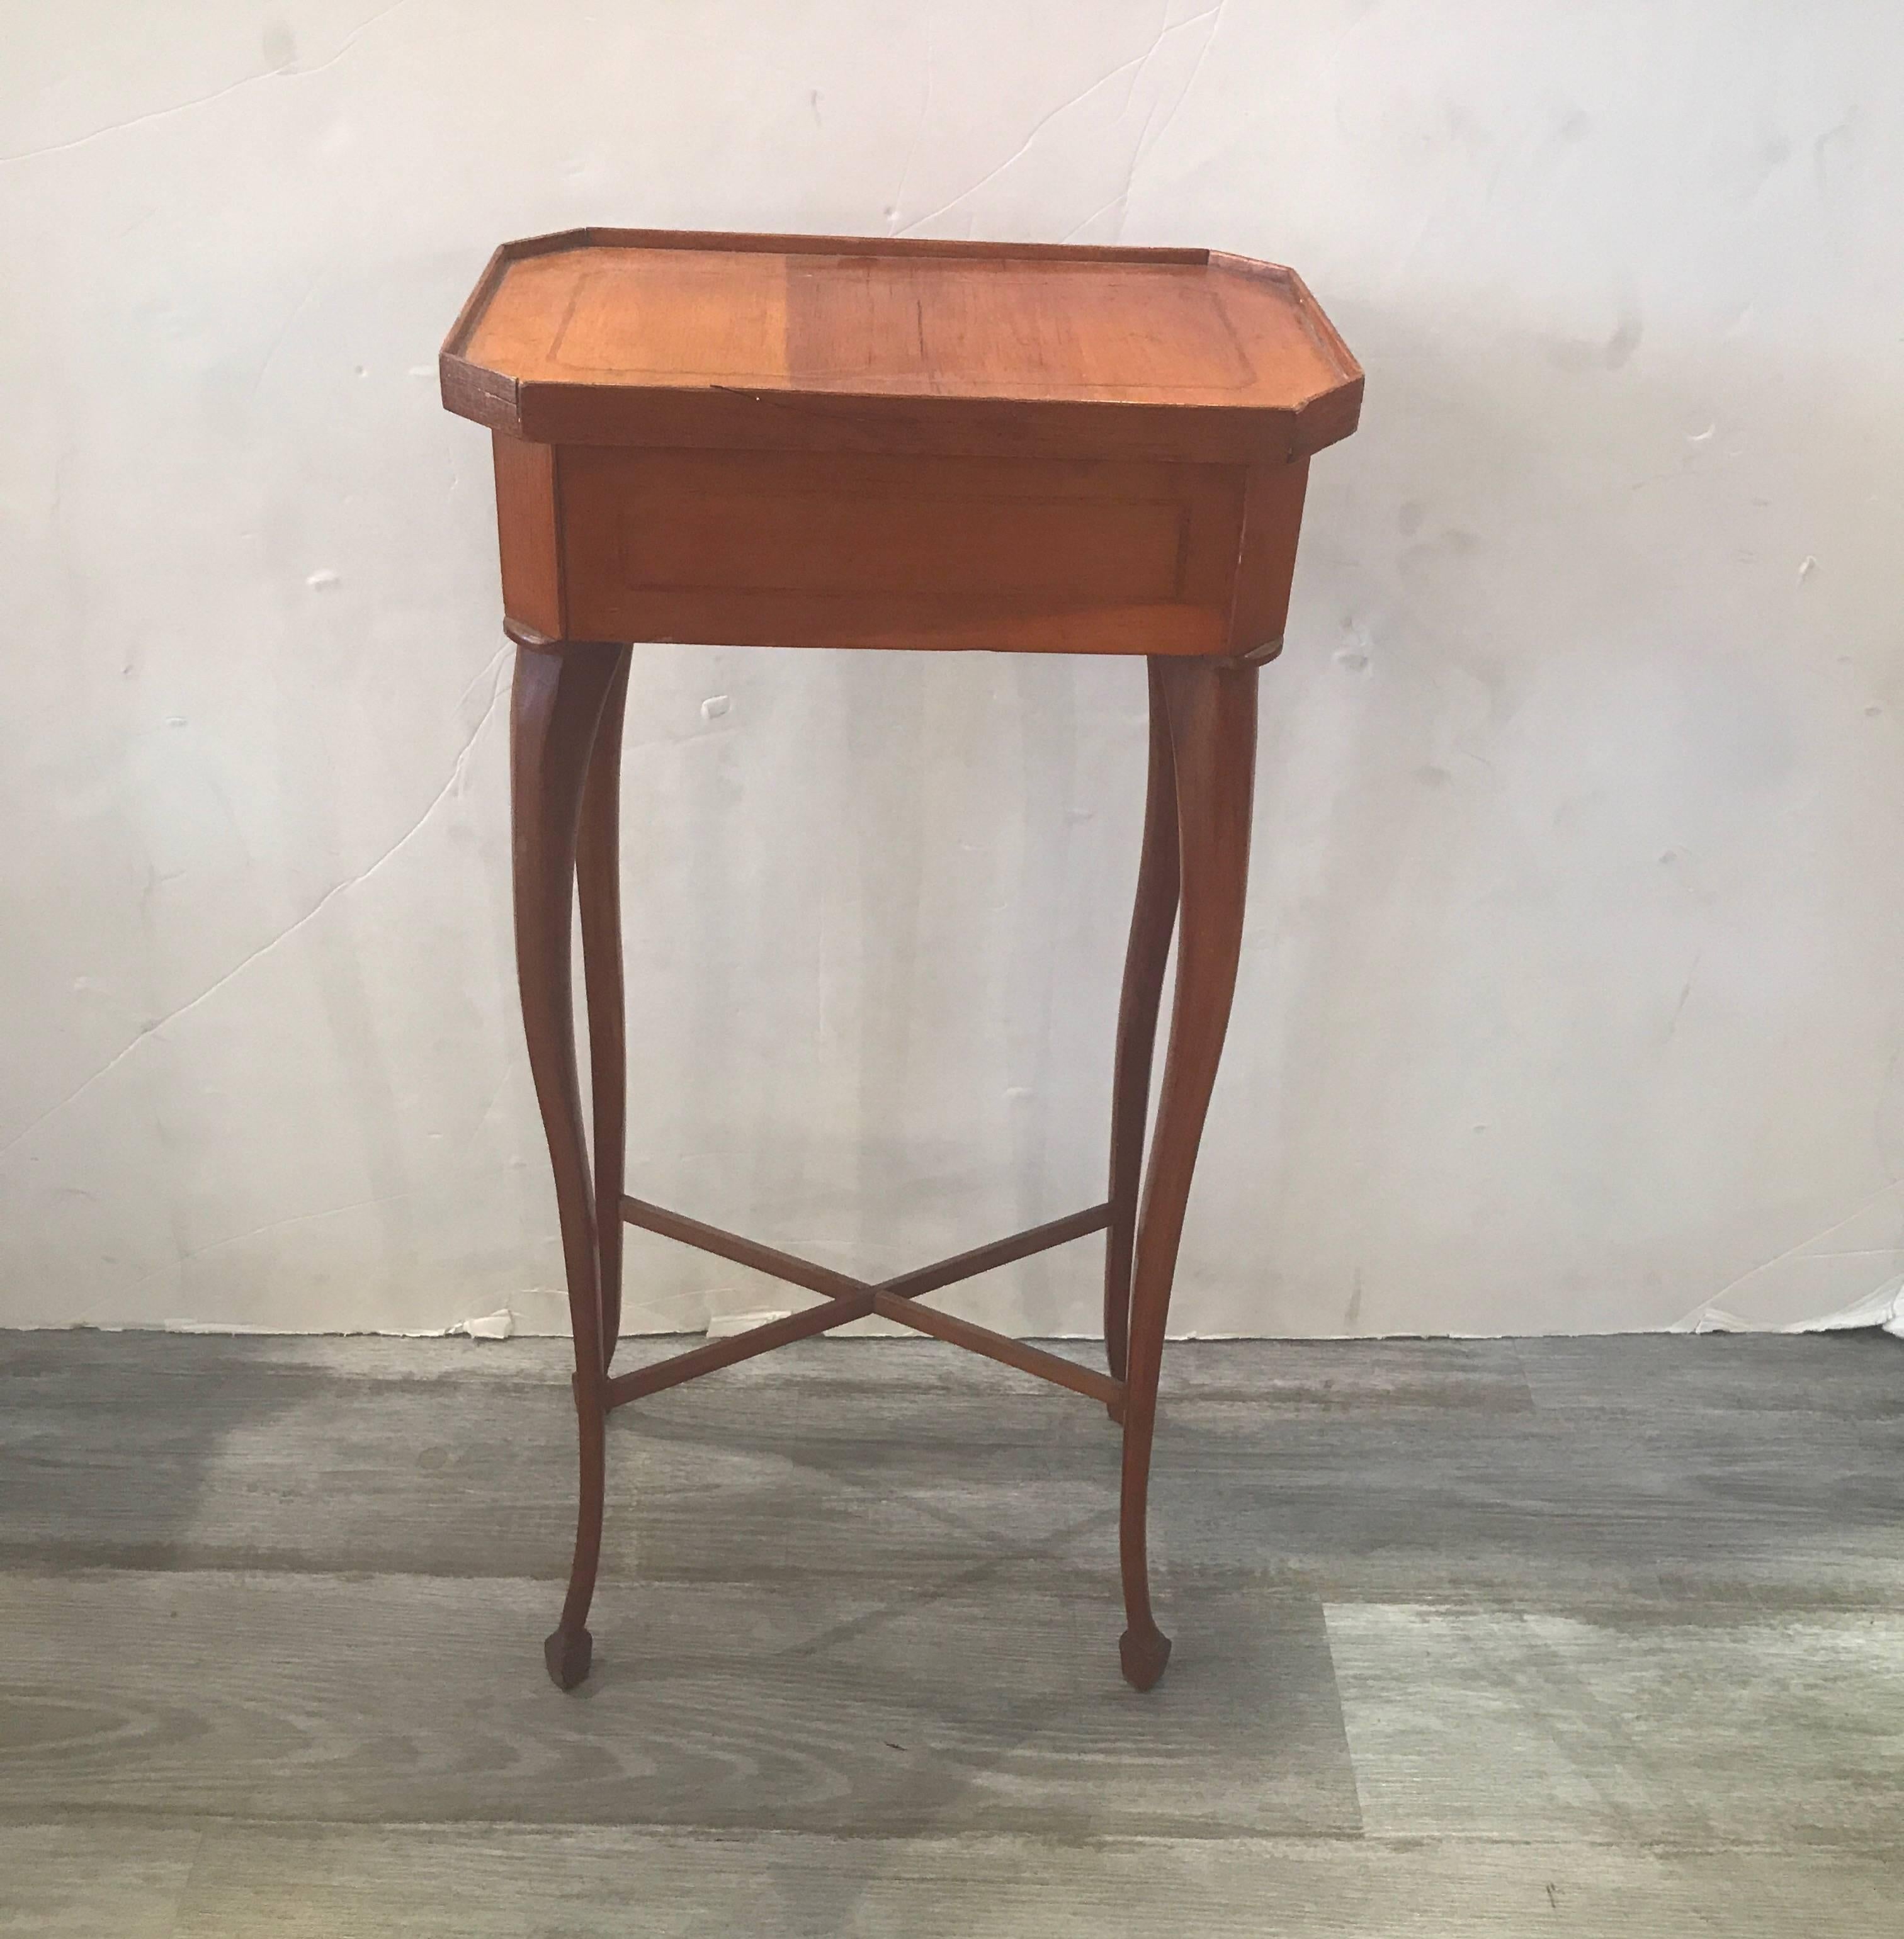 19th century Biedermier drinks side table with pencil inlay and stretcher base. A perfect small table for a narrow space between a pair of chairs.